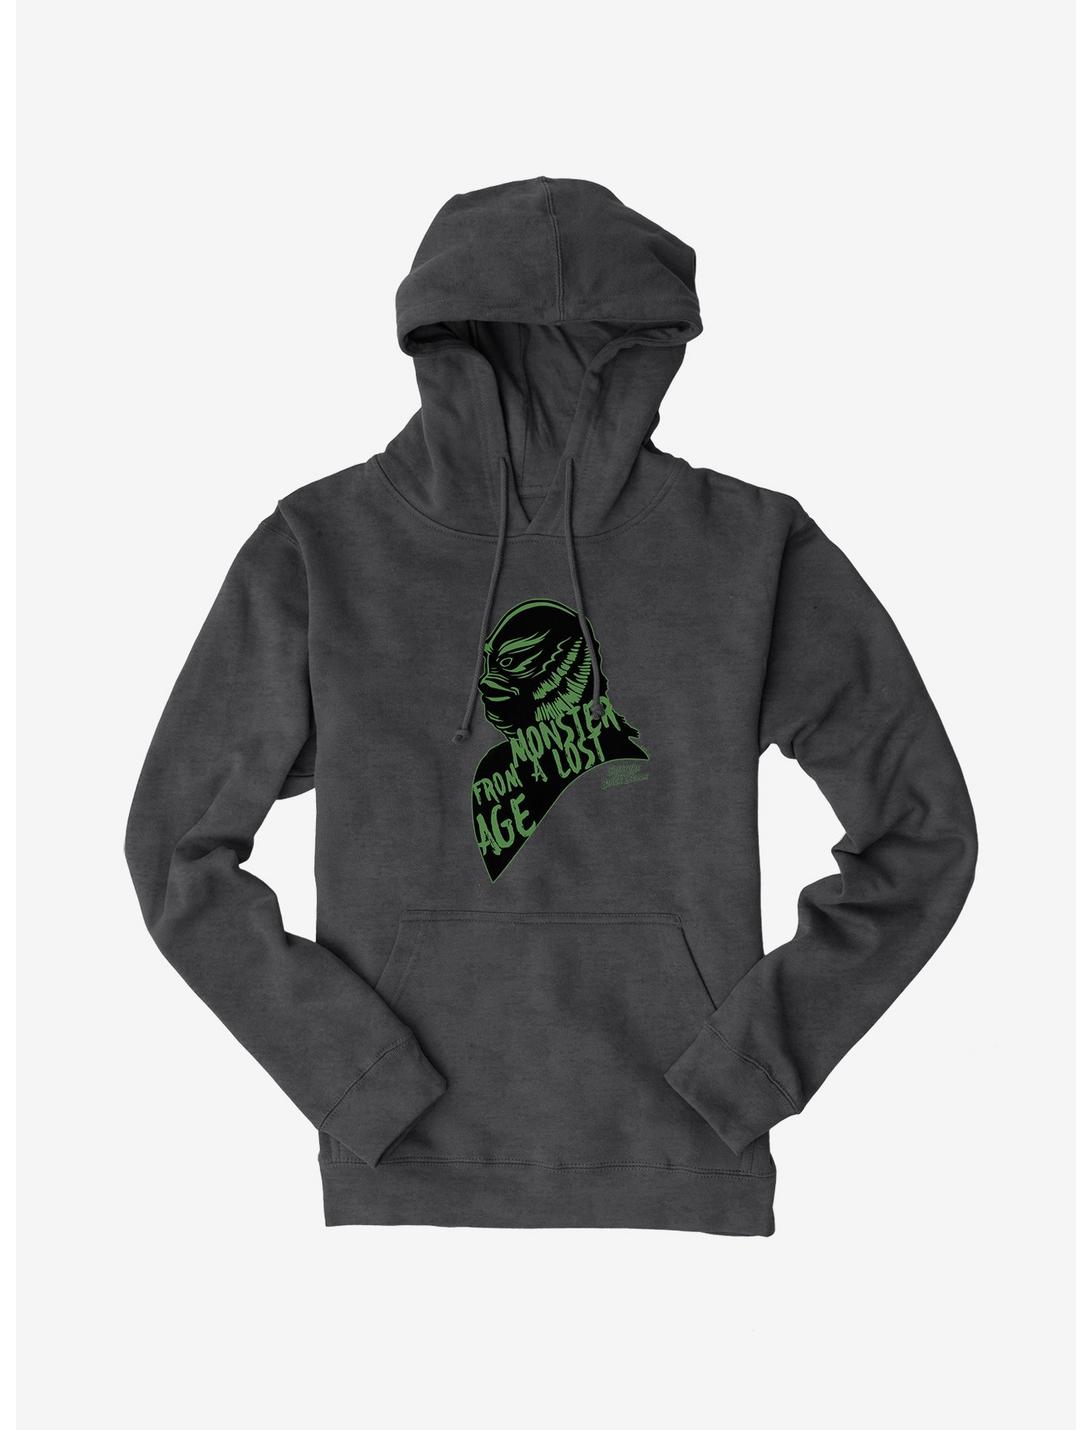 Universal Monsters Creature From The Black Lagoon Monster From A Lost Age Hoodie, CHARCOAL HEATHER, hi-res